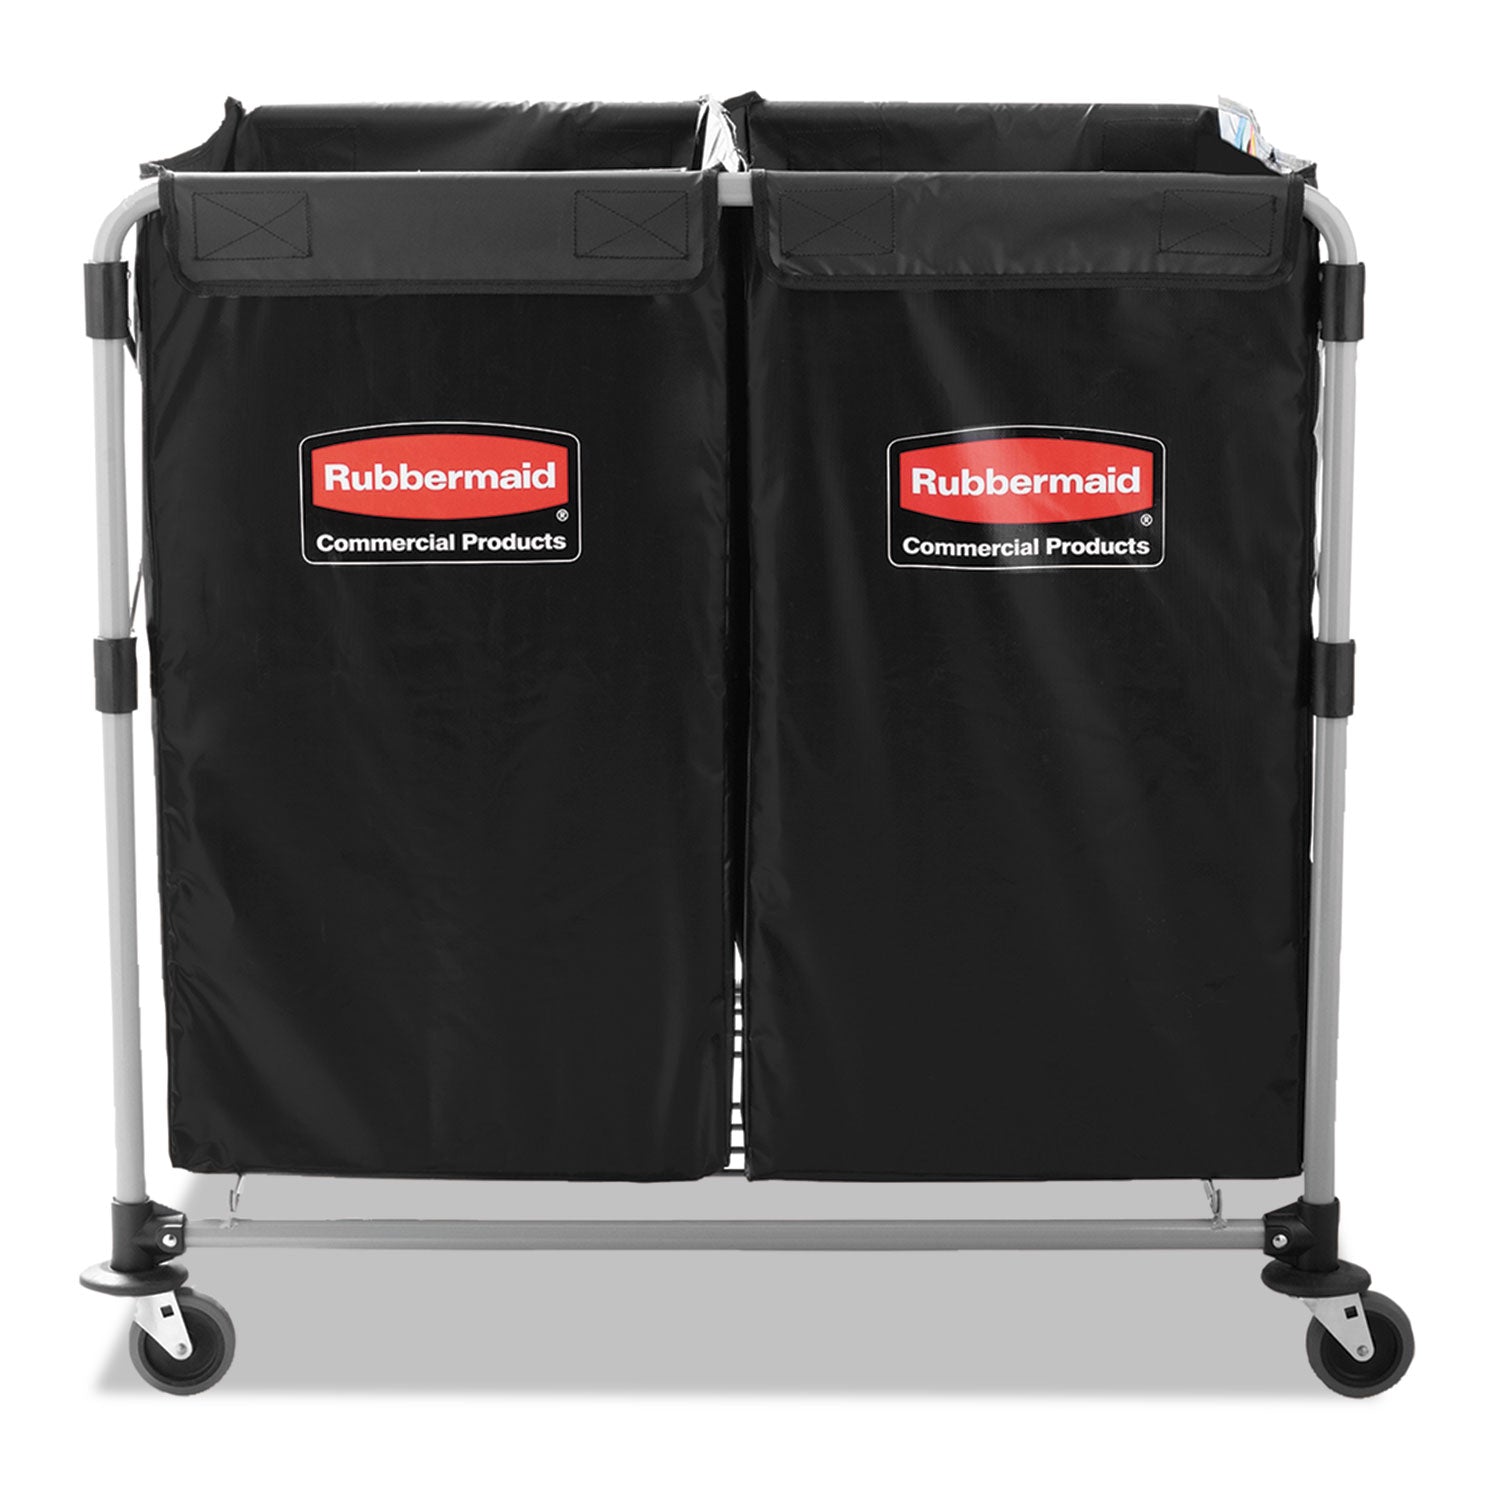 Two-Compartment Collapsible X-Cart, Synthetic Fabric, 2.49 cu ft Bins, 24.1" x 35.7" x 34", Black/Silver - 